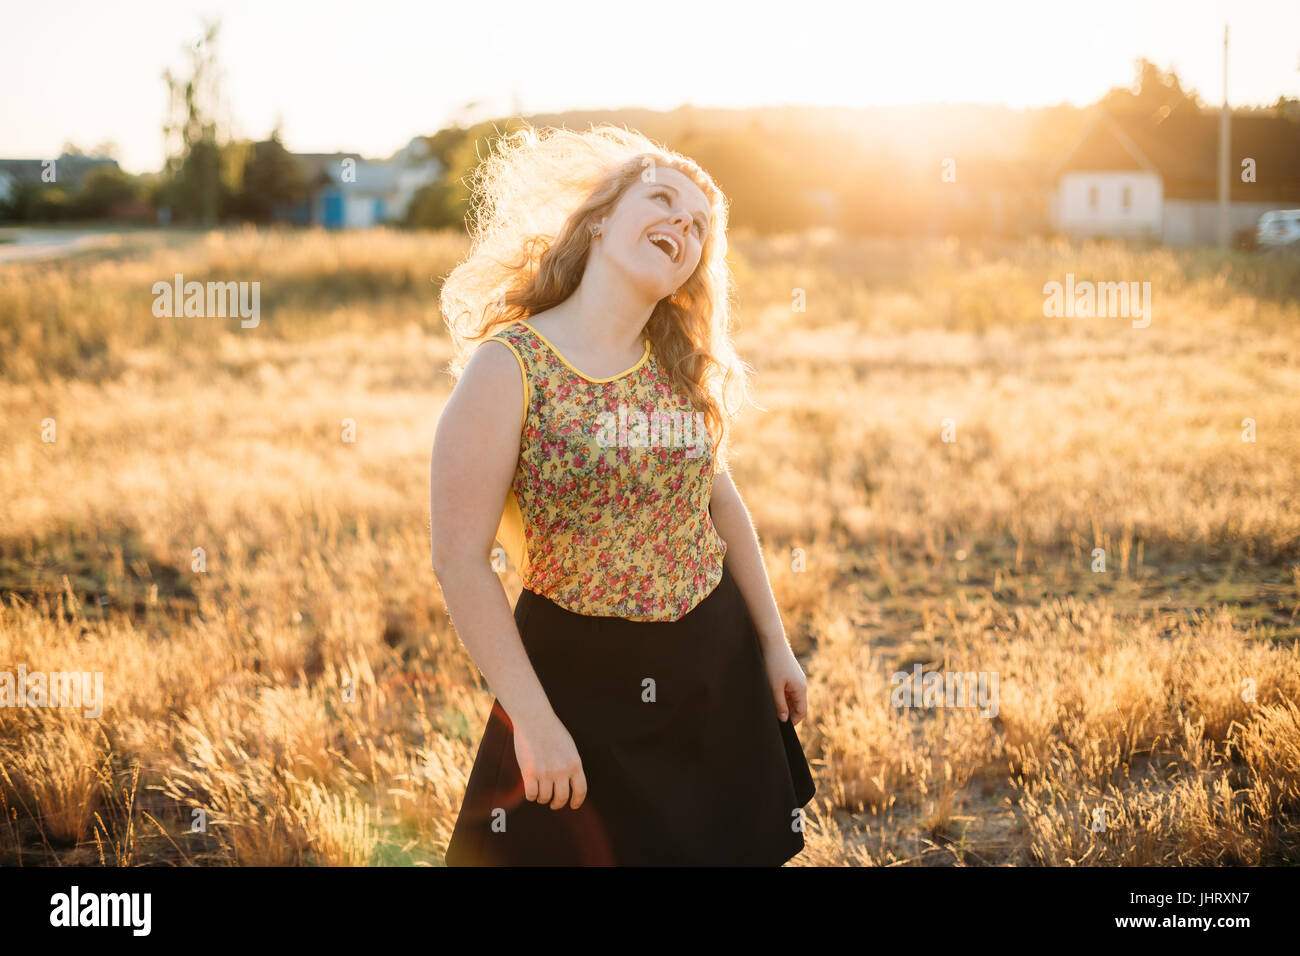 Single Young Pretty Plus Size Caucasian Happy Smiling Laughing Girl Woman Dancing In Summer Meadow. Fun Enjoy Outdoor Summer Nature. Stock Photo